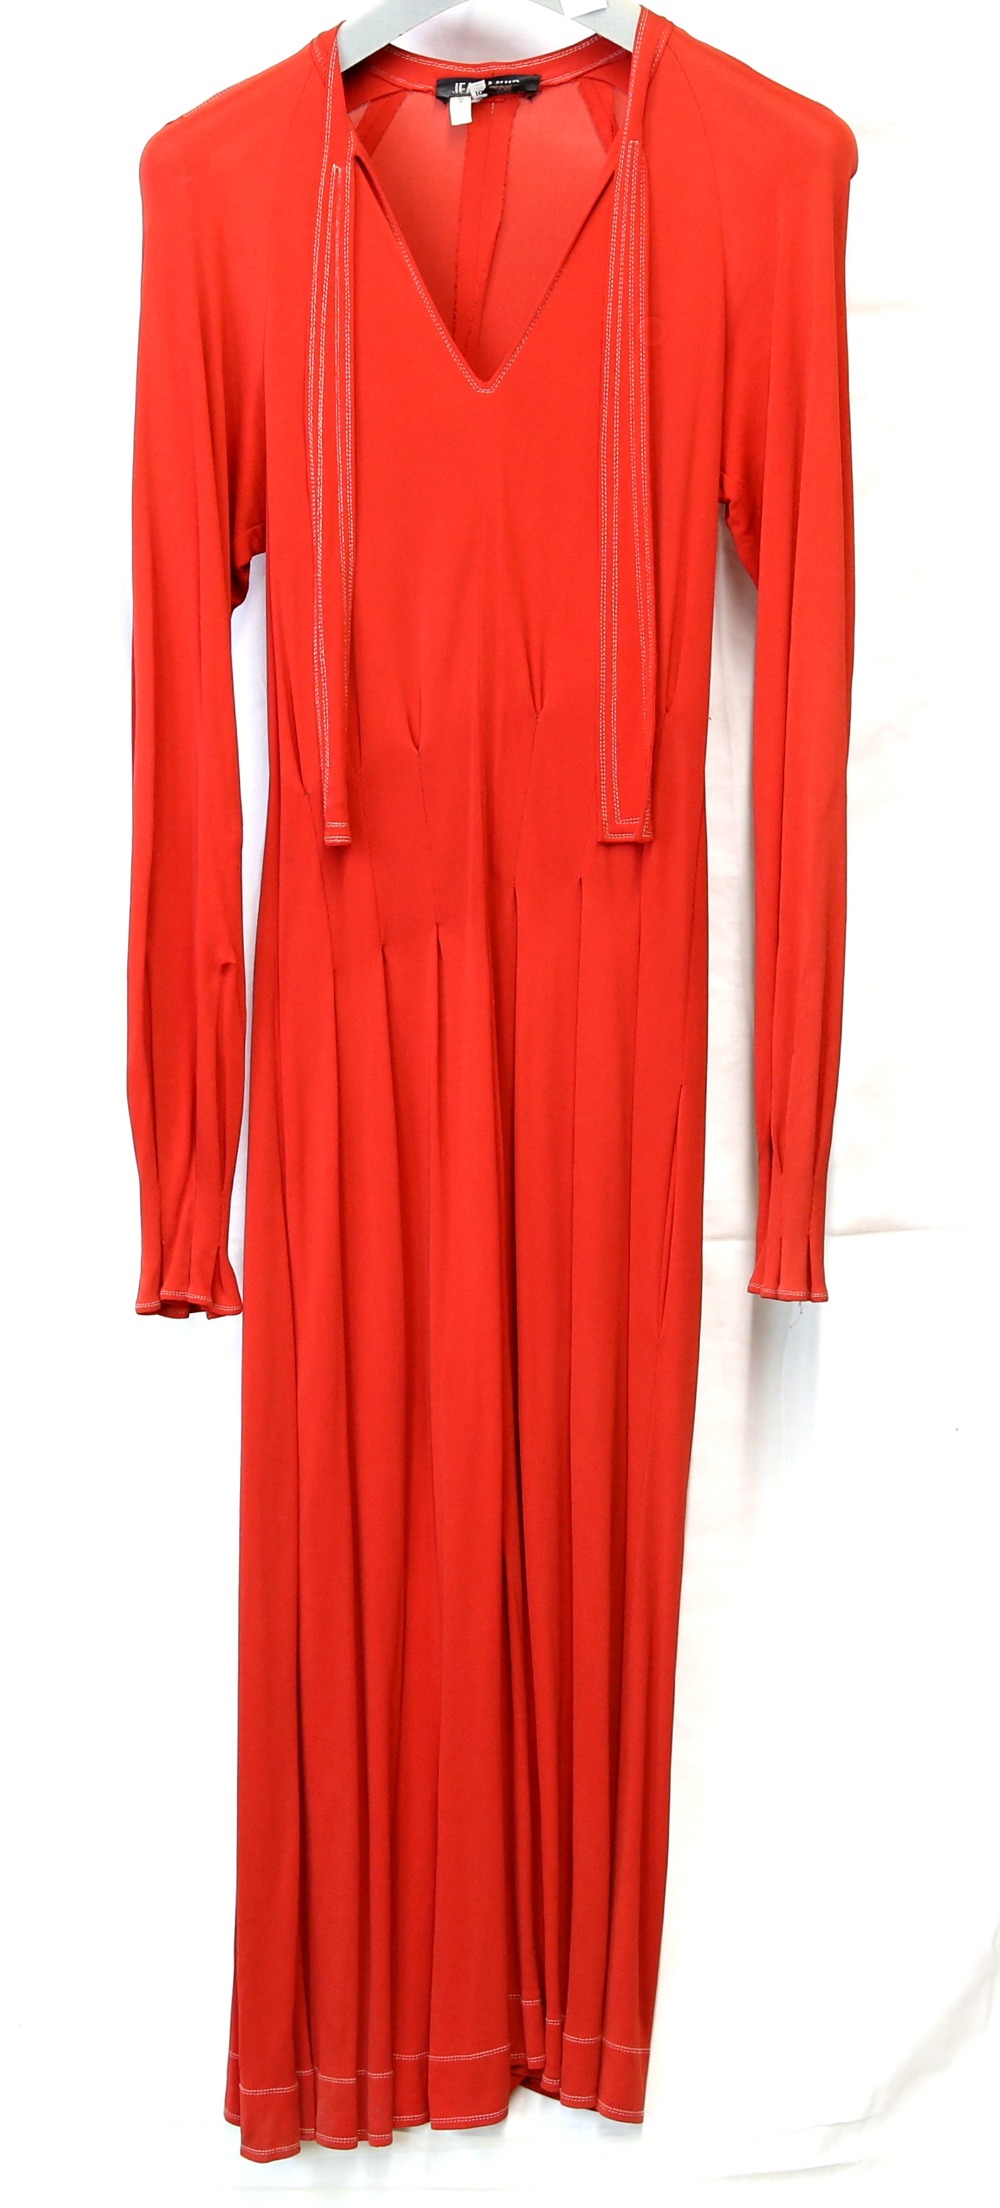 Jean Muir coral long dress with contrast stitching details, and low slung pockets together with - Image 2 of 3